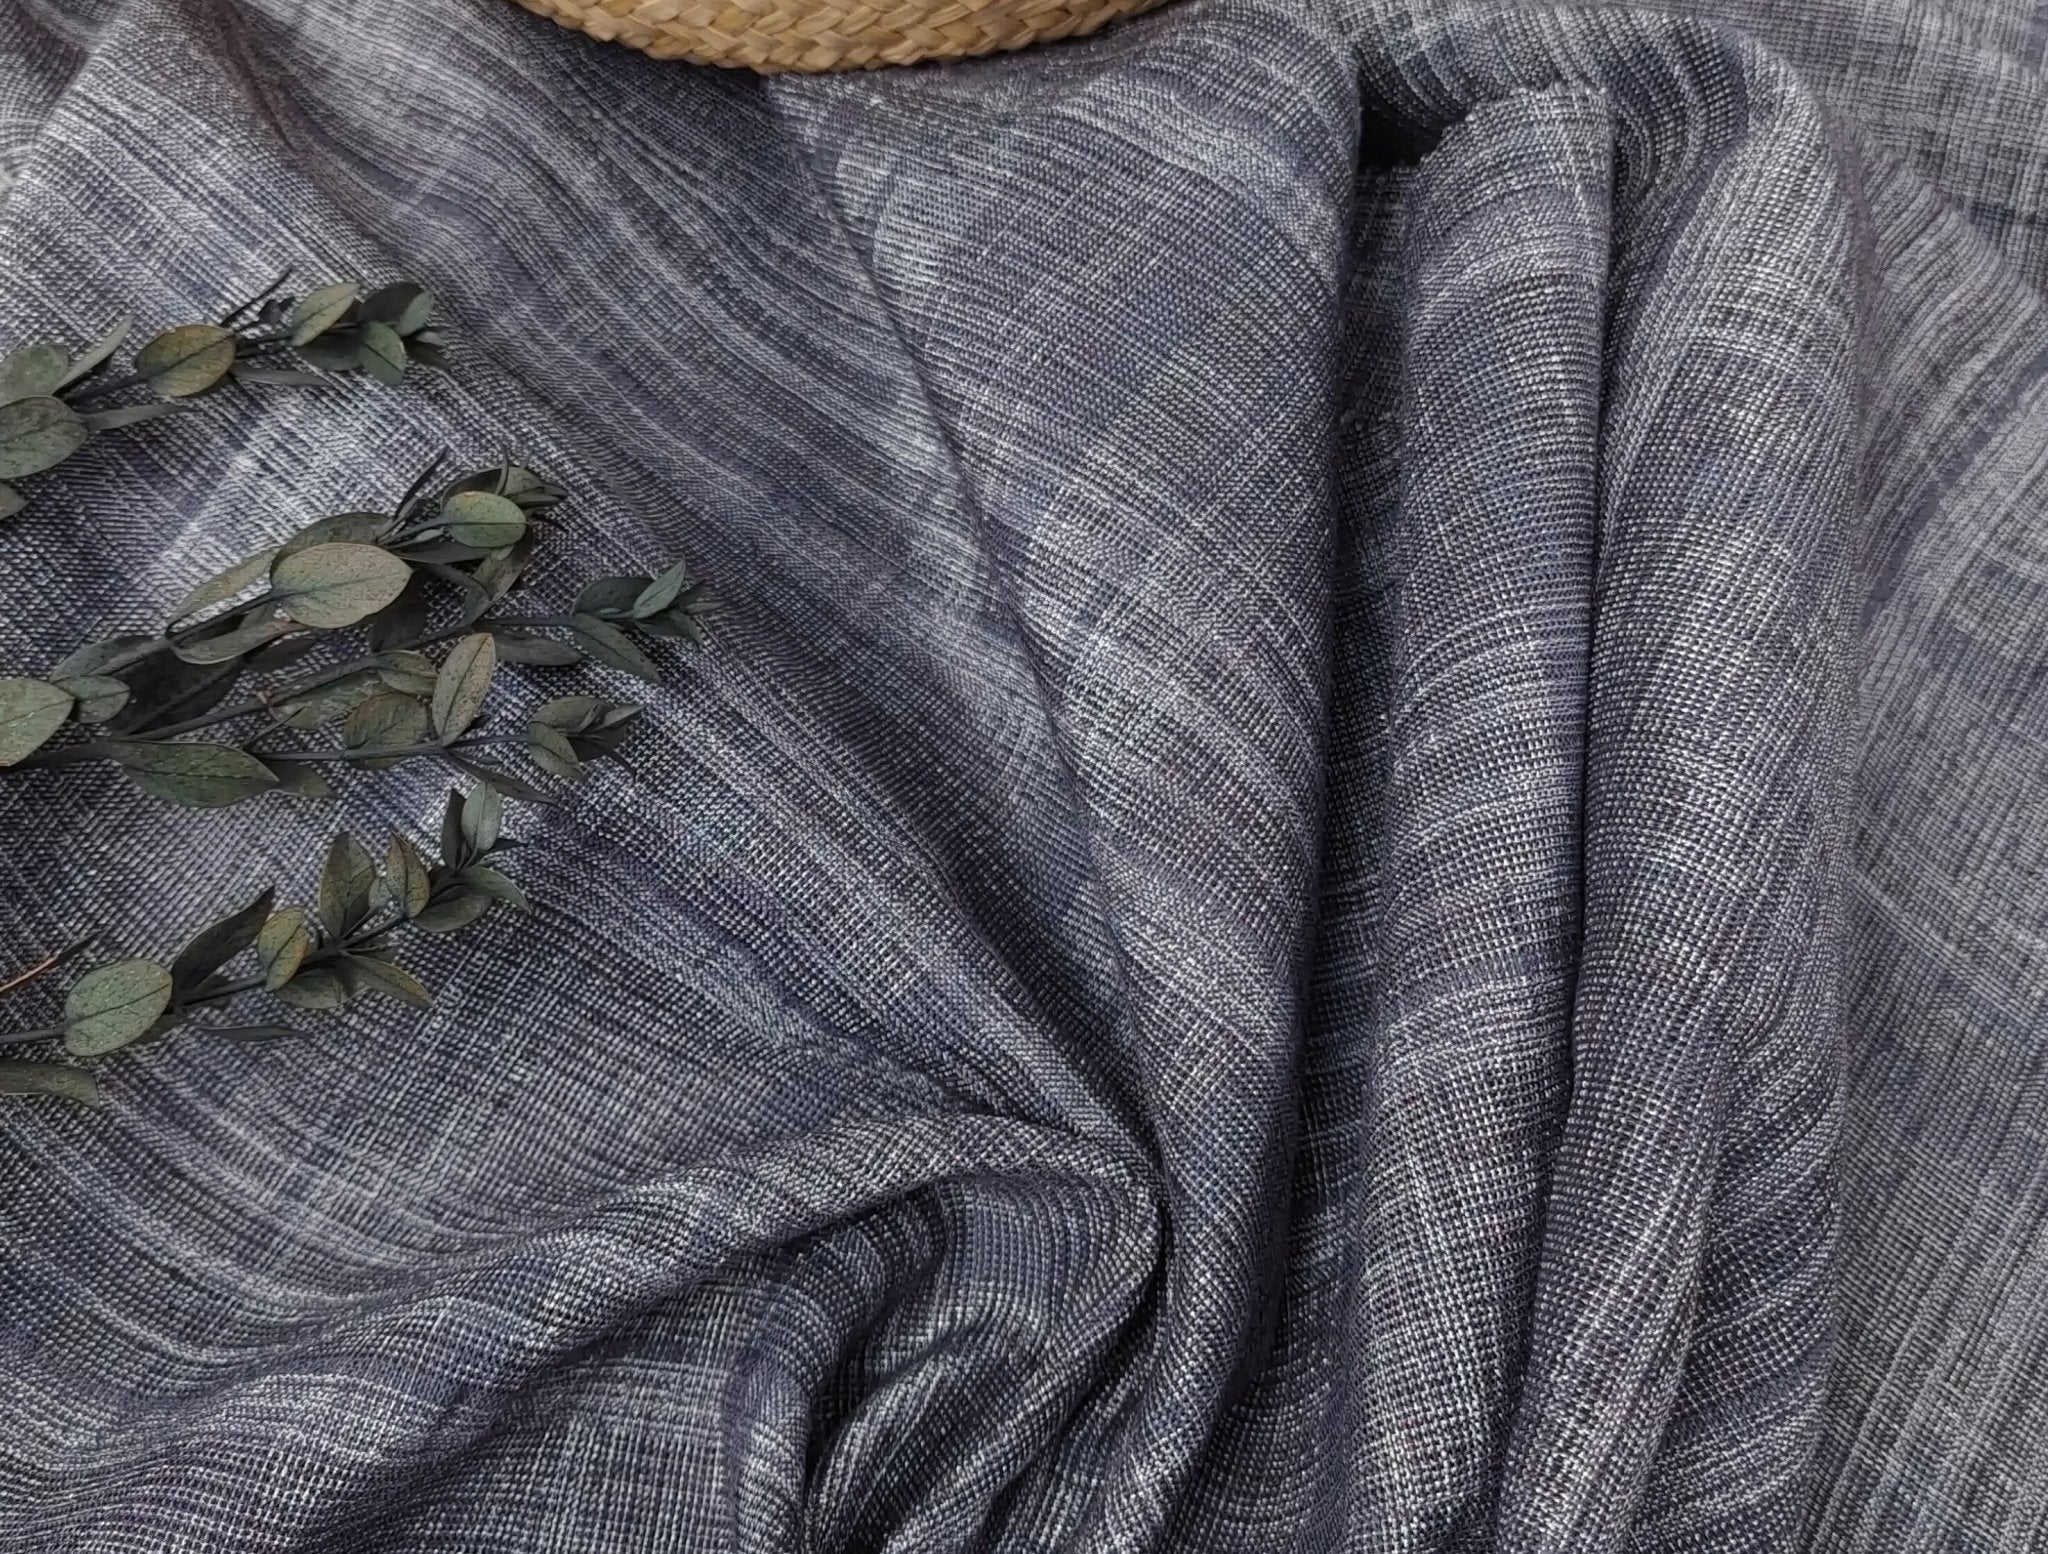 Silver Threads Plaid: Linen Blend Fabric with Metallic Effect 2725 - The Linen Lab - Grey